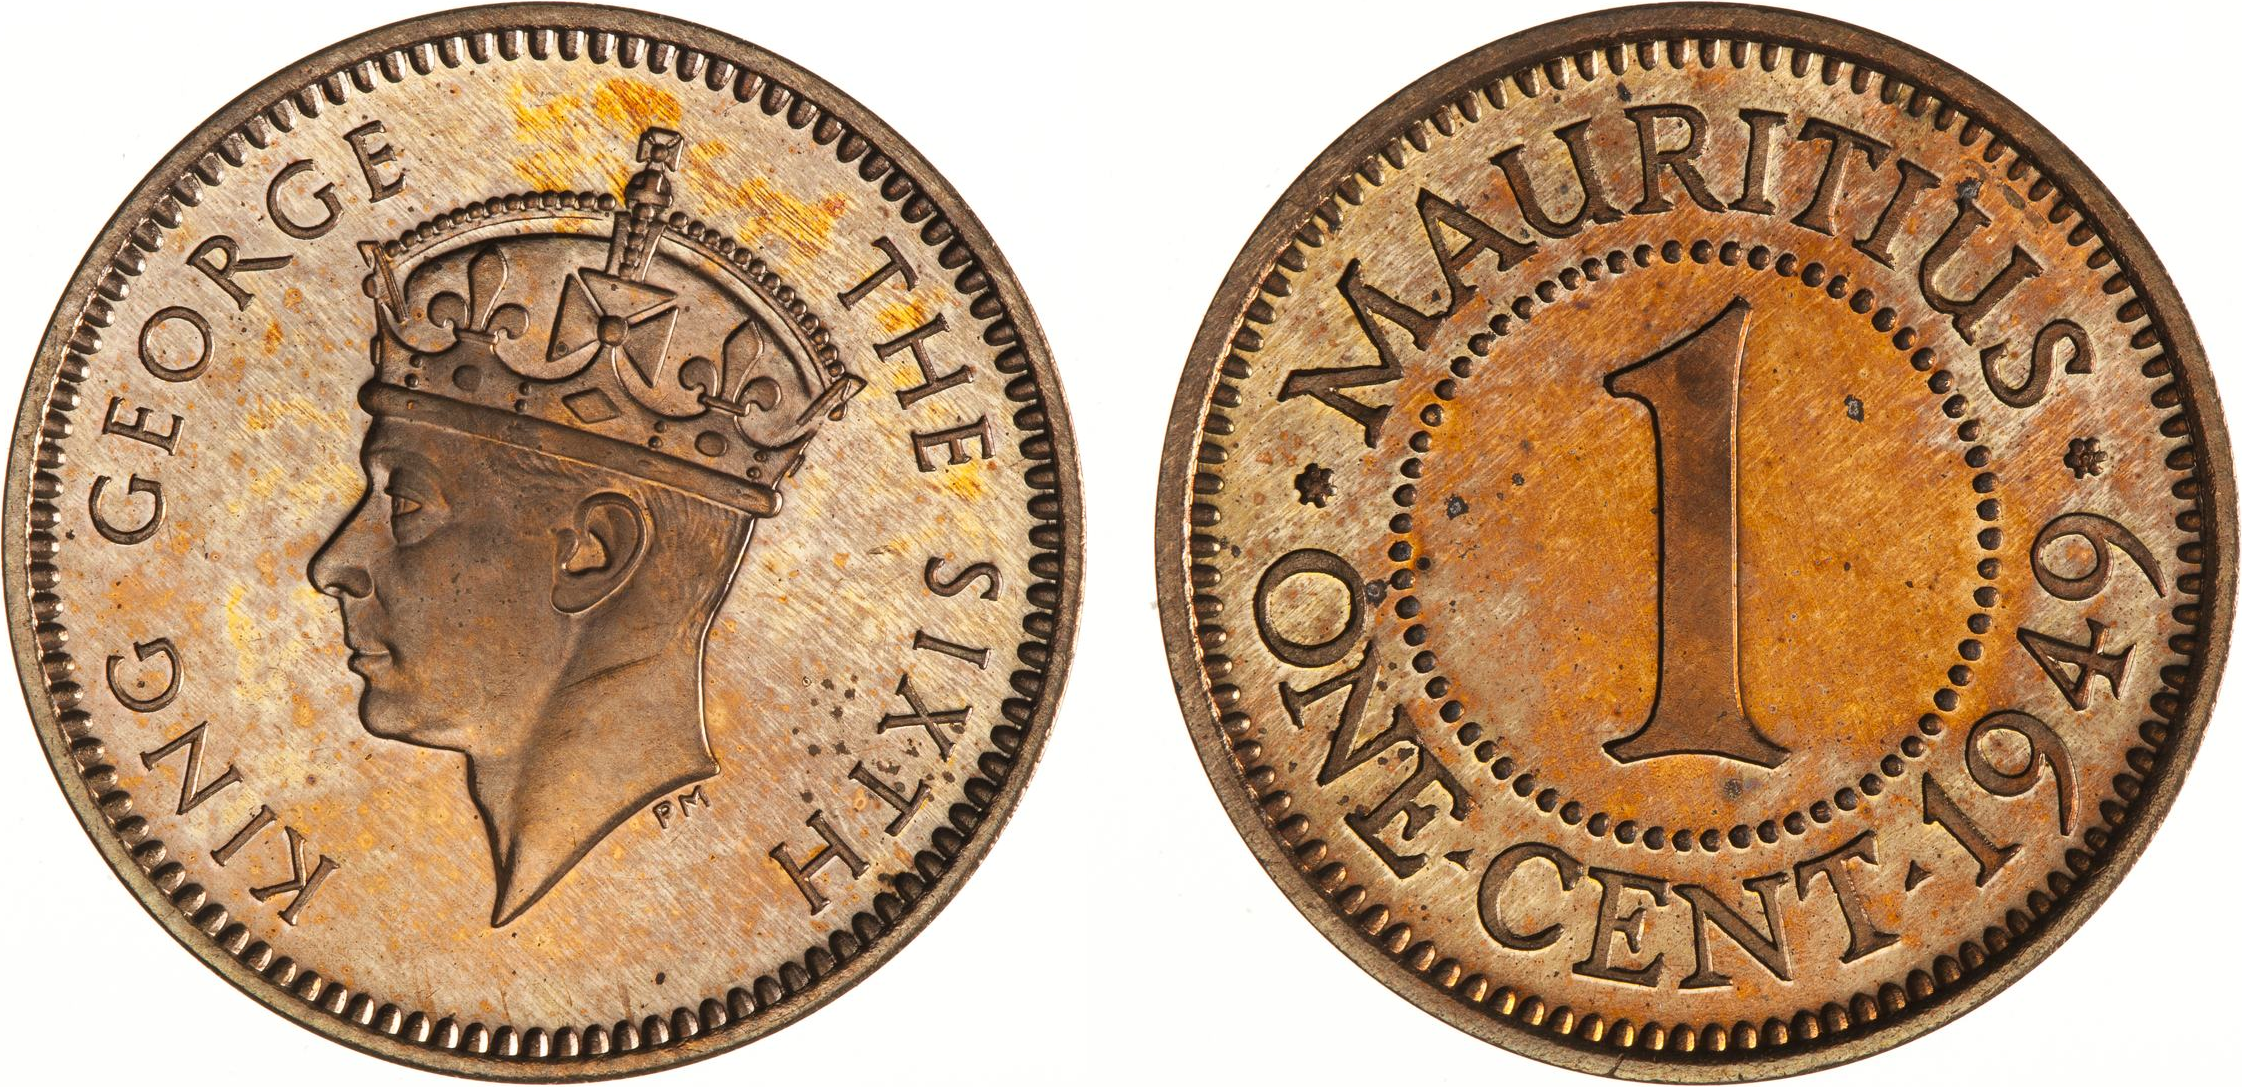 South African 1 cent coin, Currency Wiki